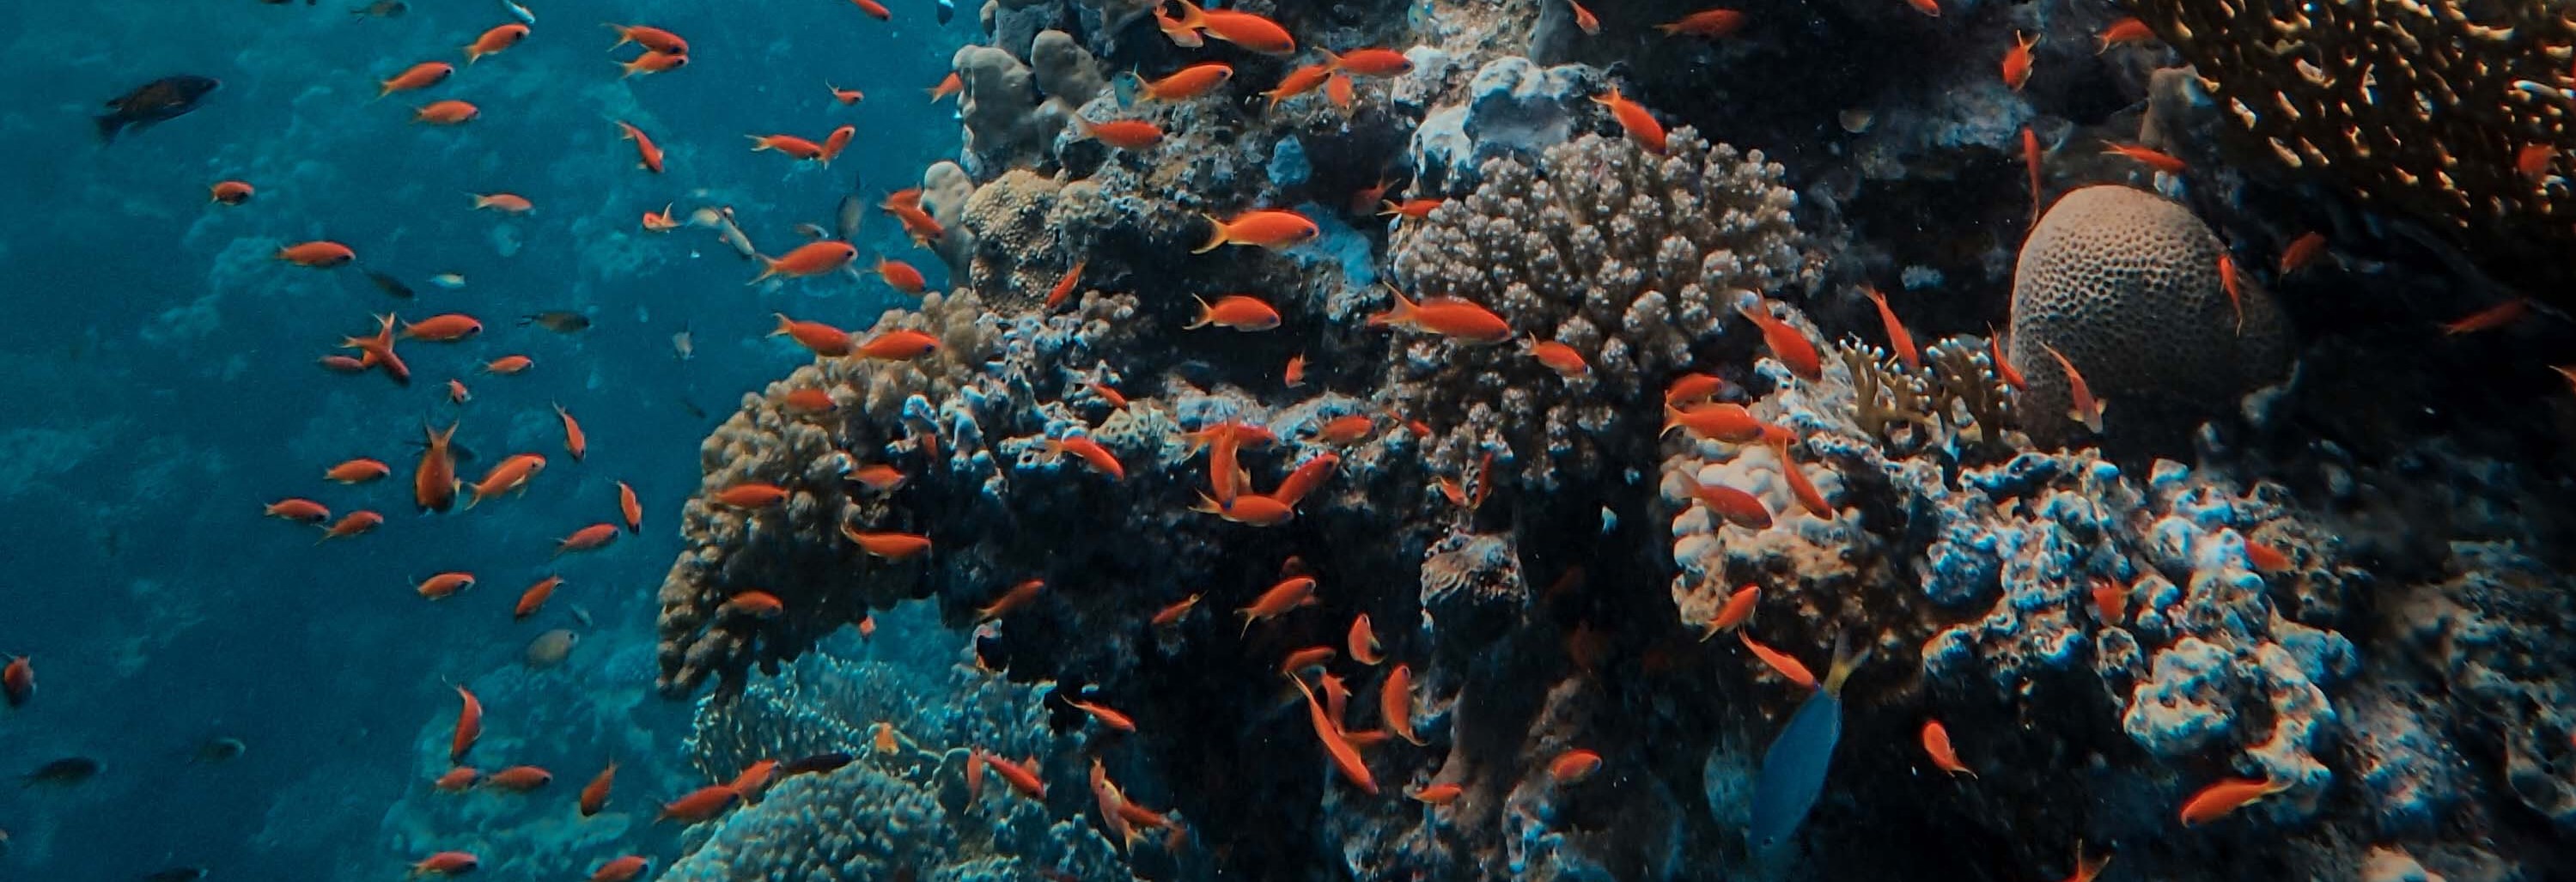 Coral reef with many red fish swimming around it, represetning the aquatic ecosystem from the McKinsey Solve assessment